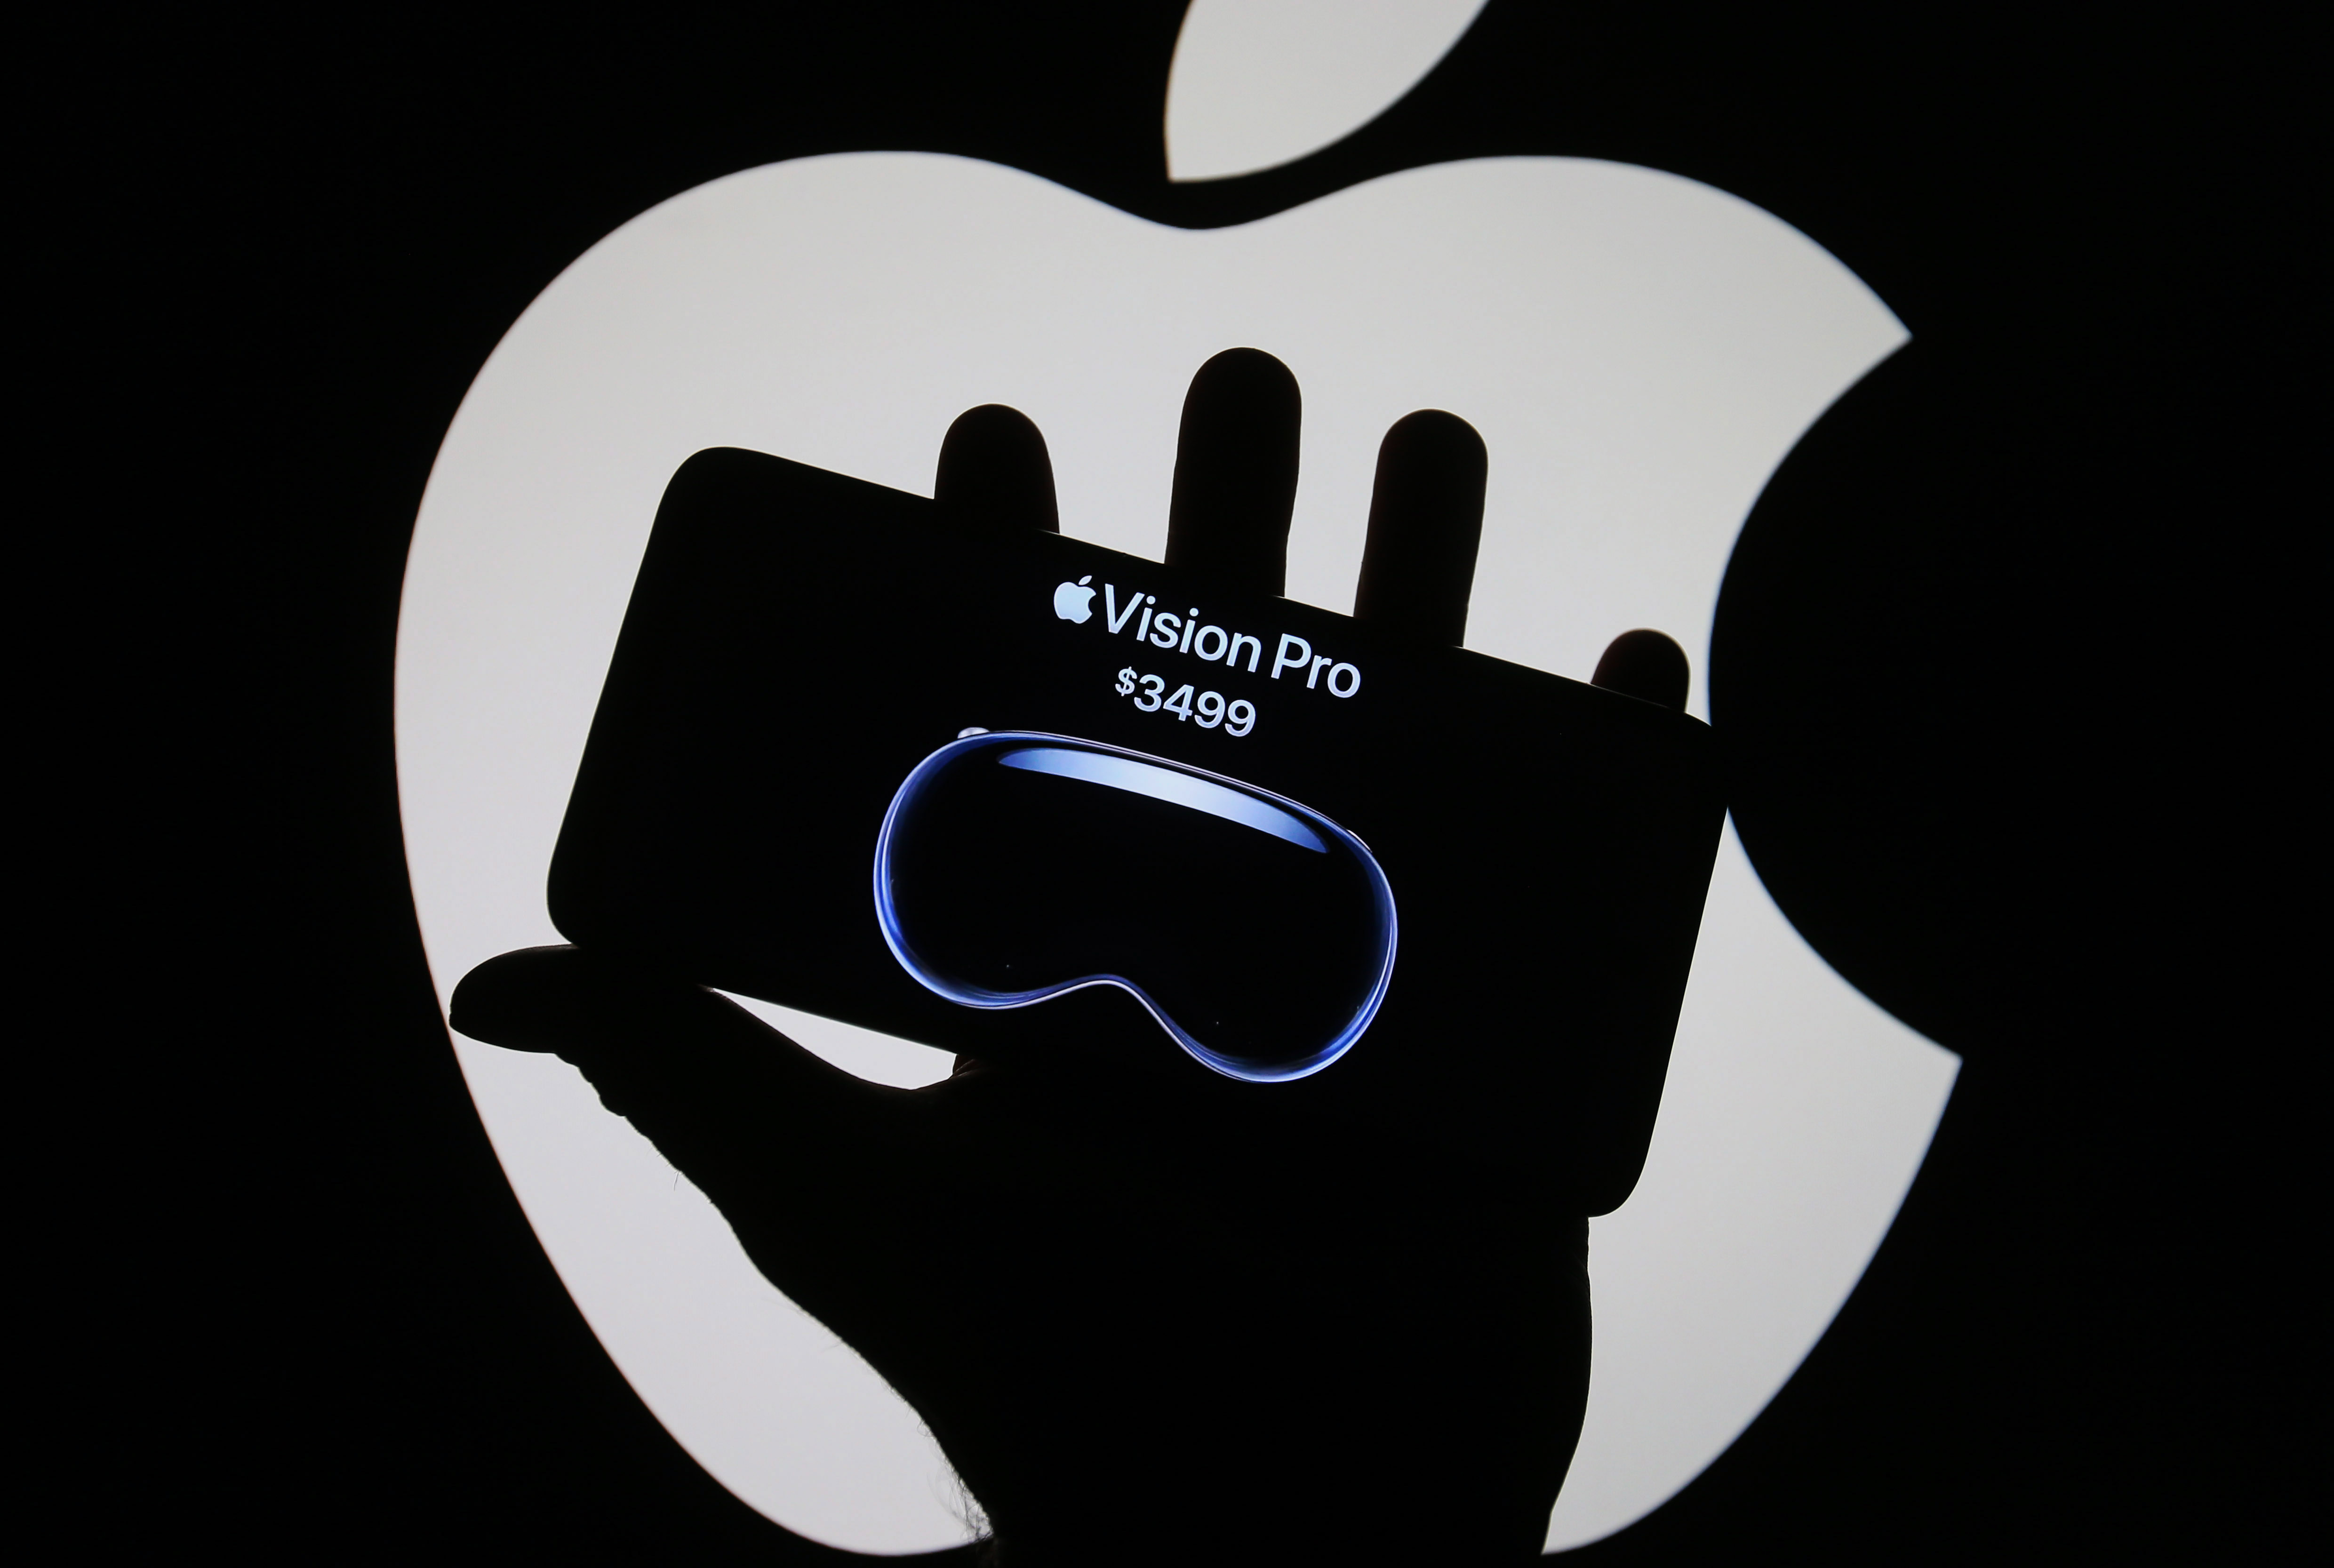 Apple&#039;s Vision Pro mixed-reality headset pictured on an iPhone screen